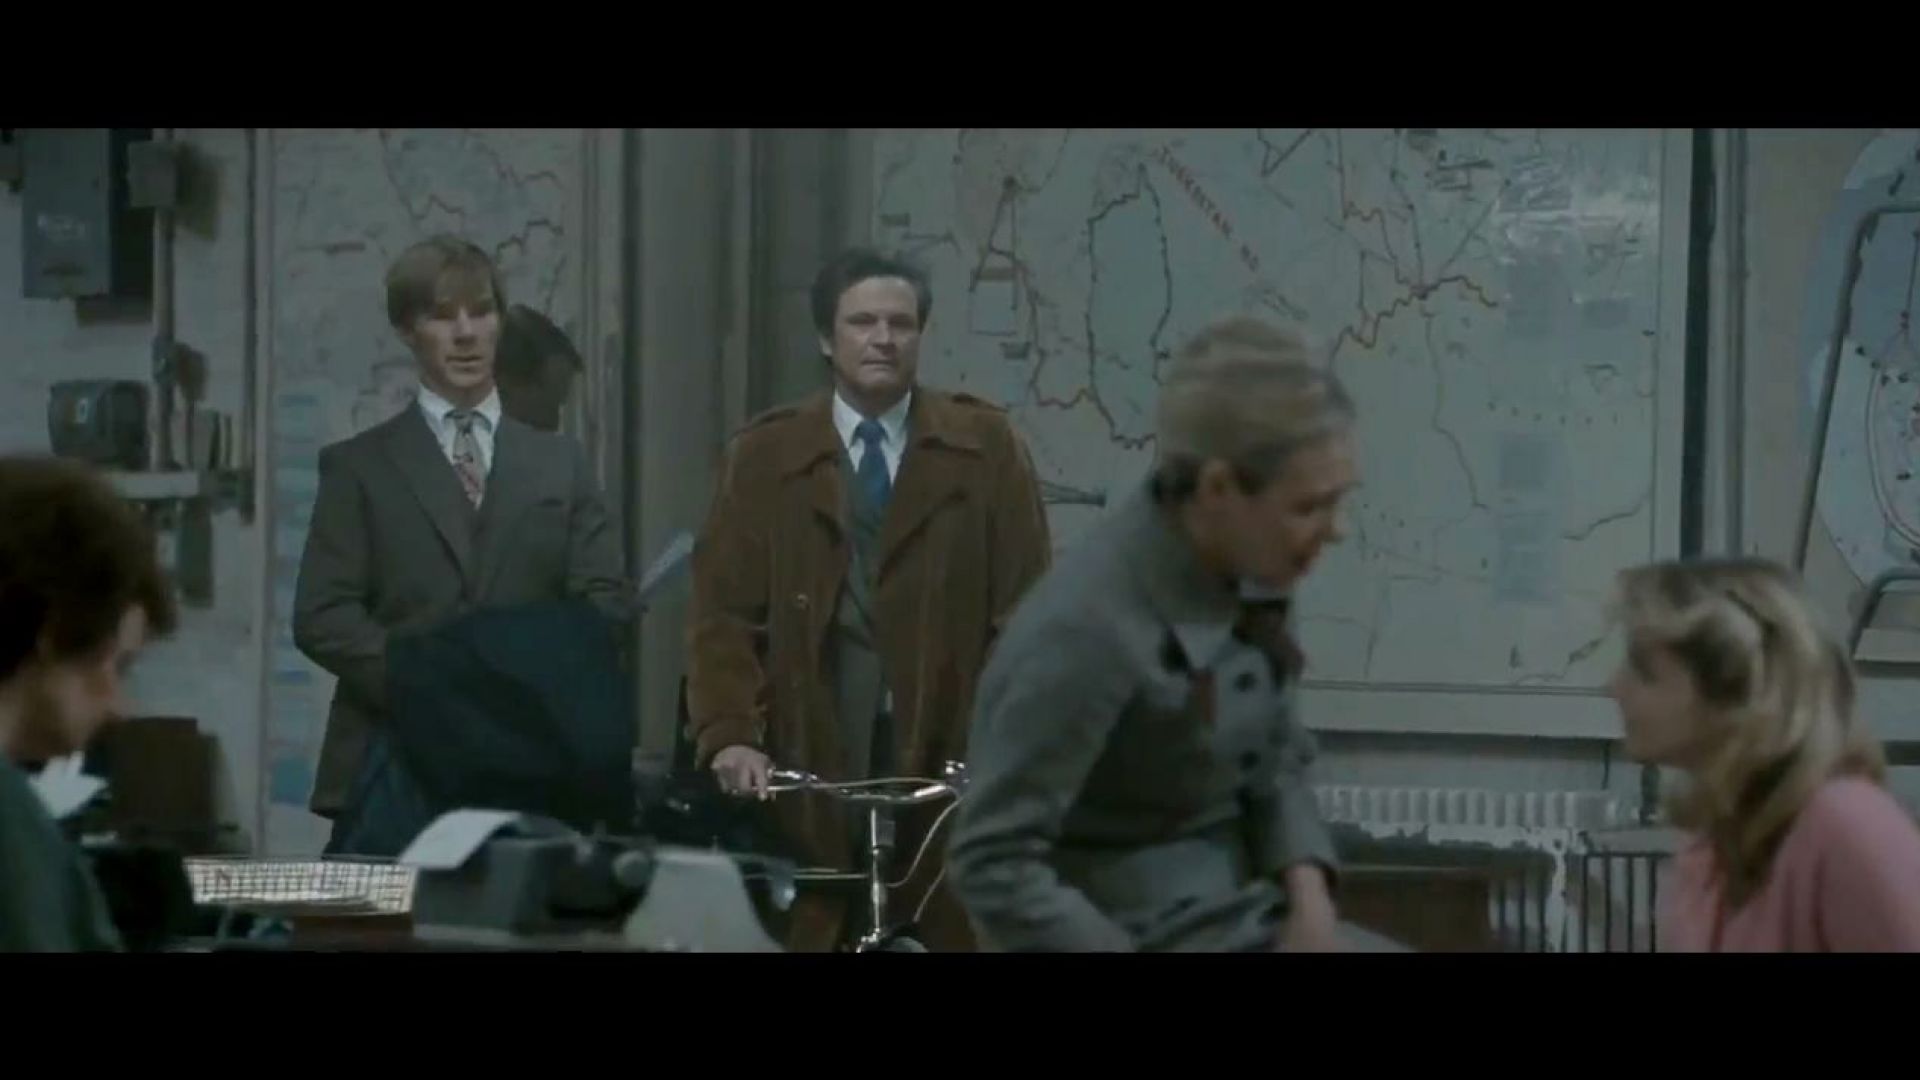 Benedict Cumberbatch and Colin Firth discuss Belinda the blond in Tinker Tailor Soldier Spy